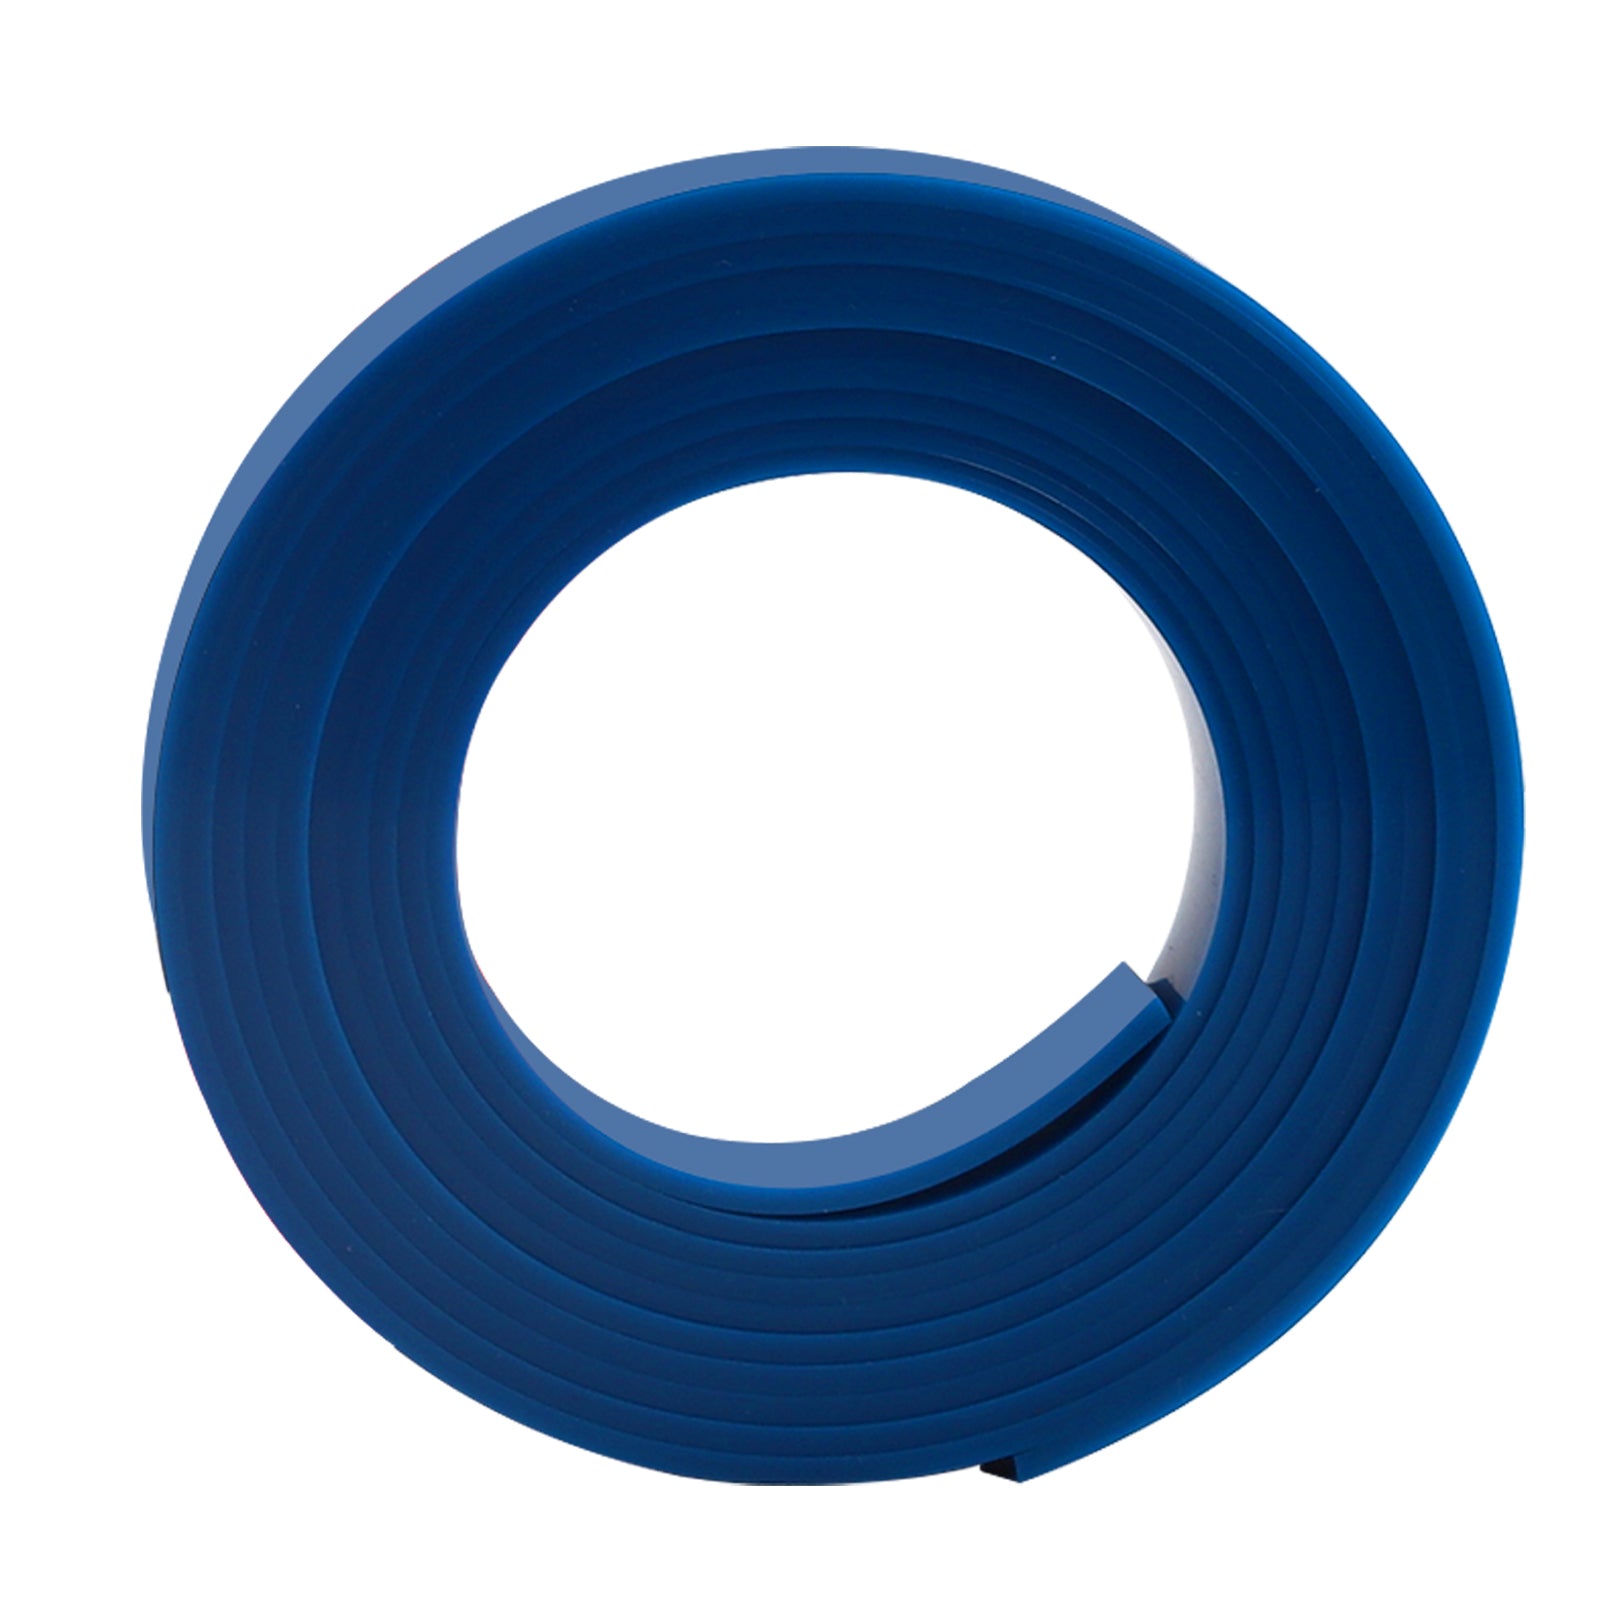 Single blue Fusion Squeegee Channel Refill roll, emphasizing its durability and effective window cleaning performance.